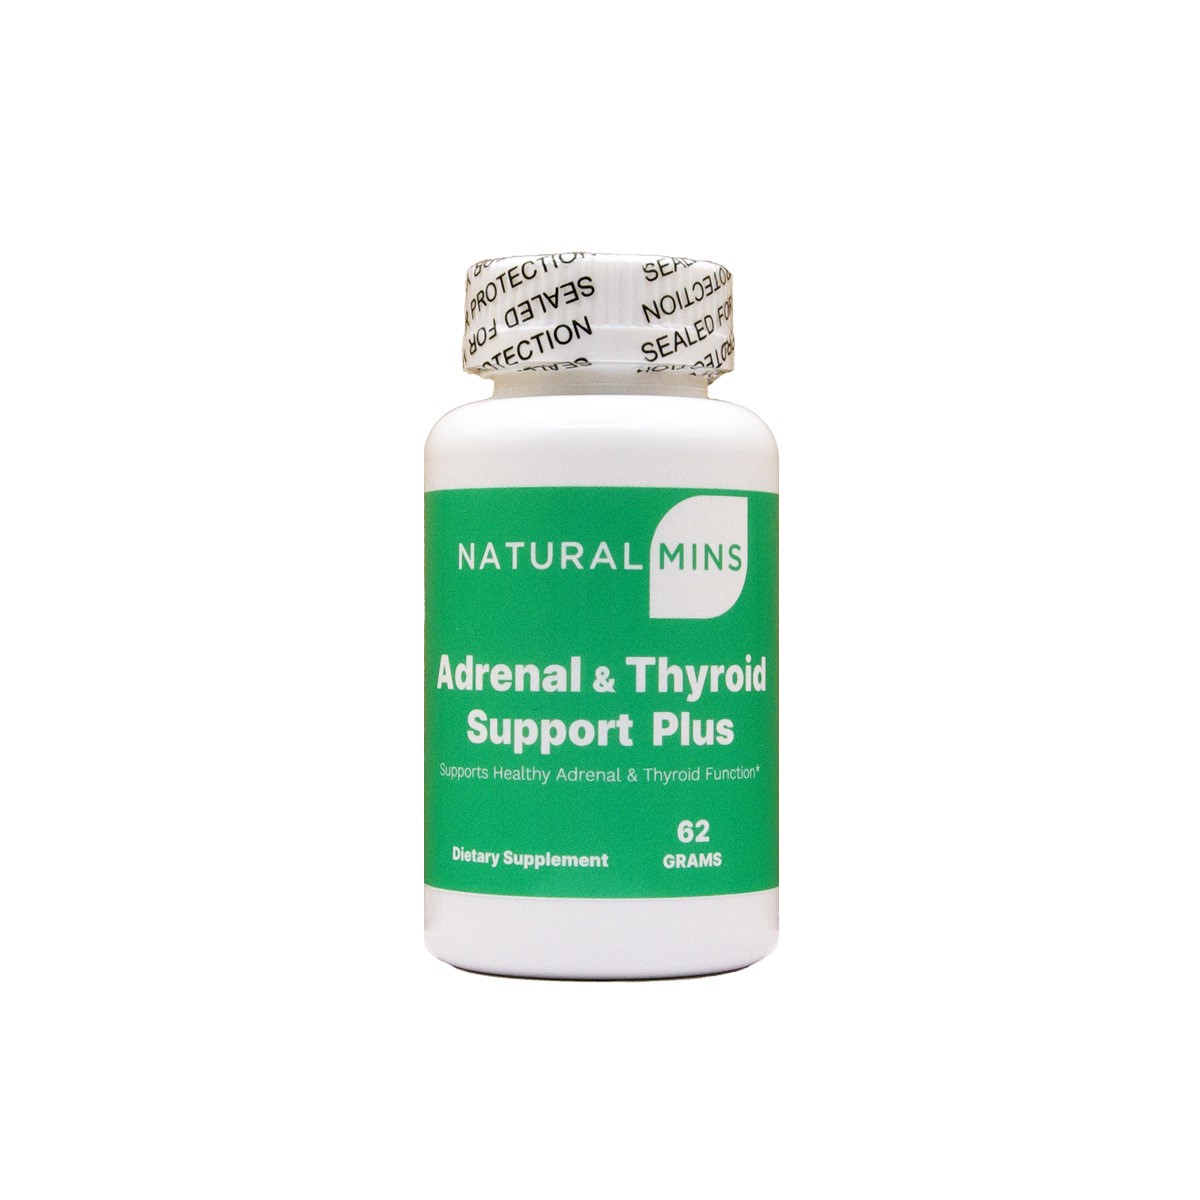 Adrenal and Thyroid Support Plus